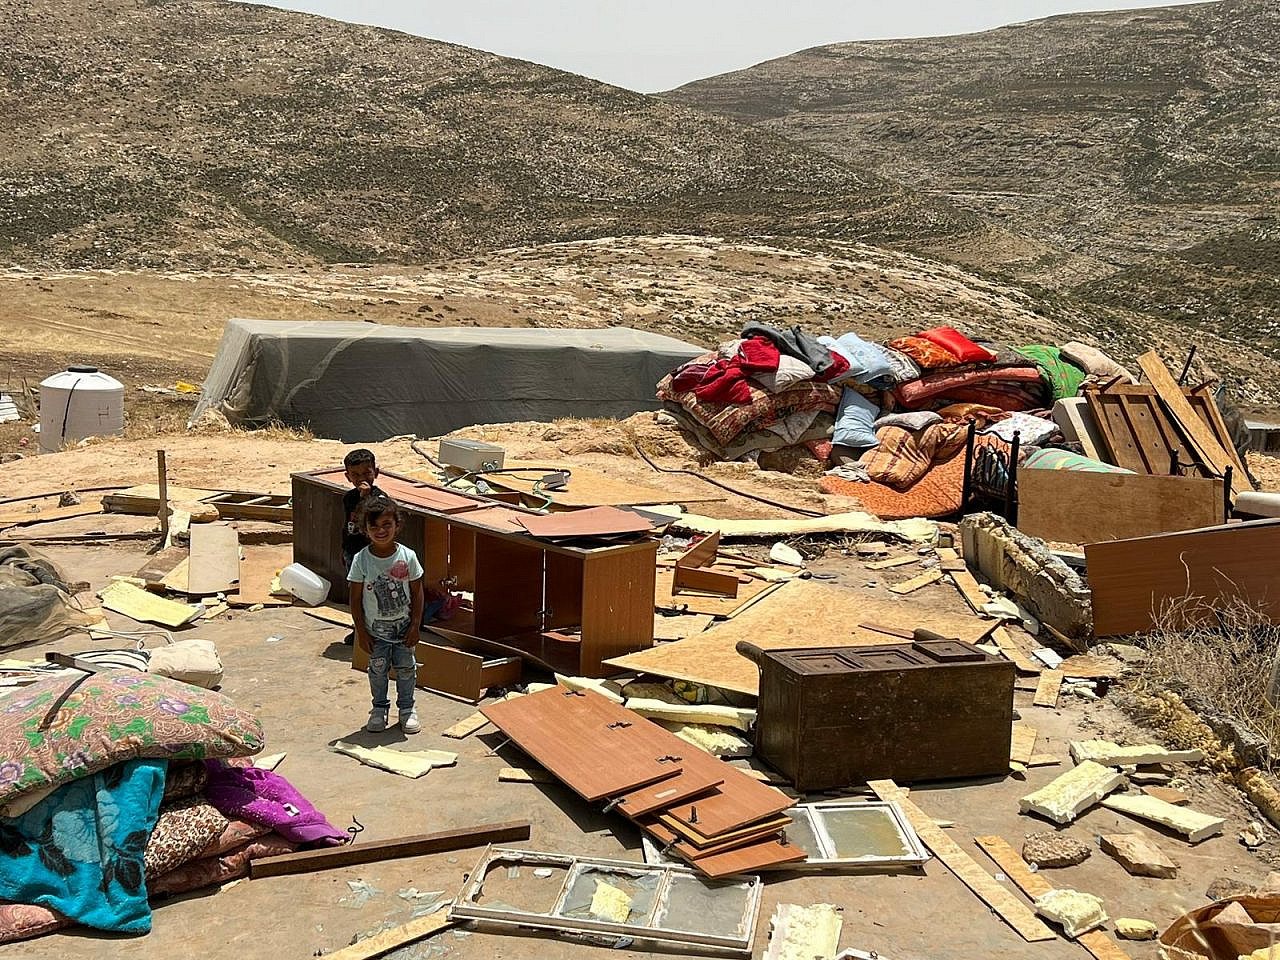  The belongings and remains of homes of Palestinian families in ‘Ein Samia, occupied West Bank, May 23, 2023. (Basel Adra)